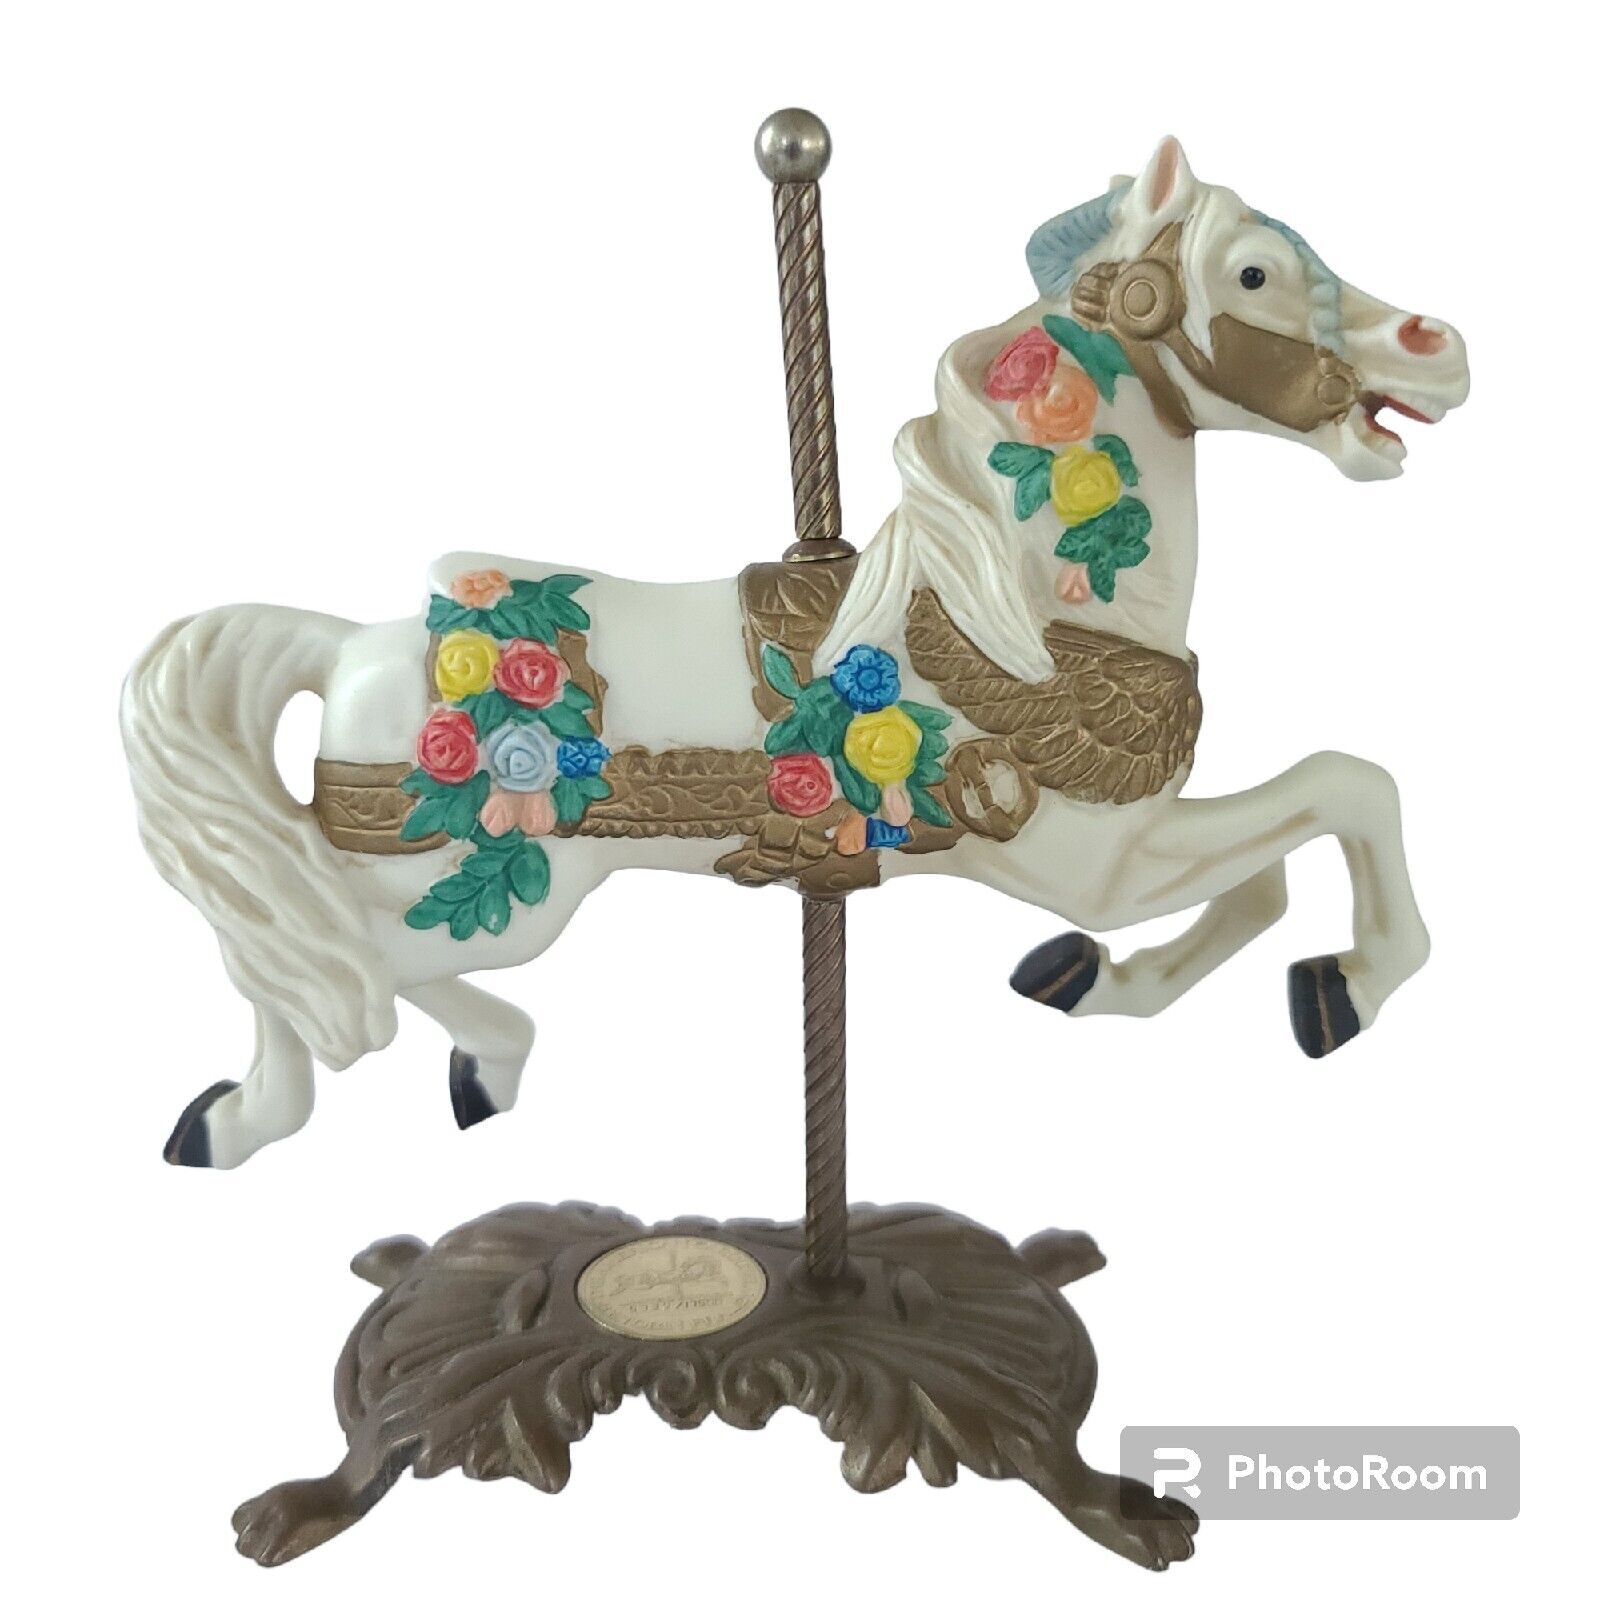 The American Carousel Horse Tobin Fraley Limited Edition Vintage 5730 of 17500